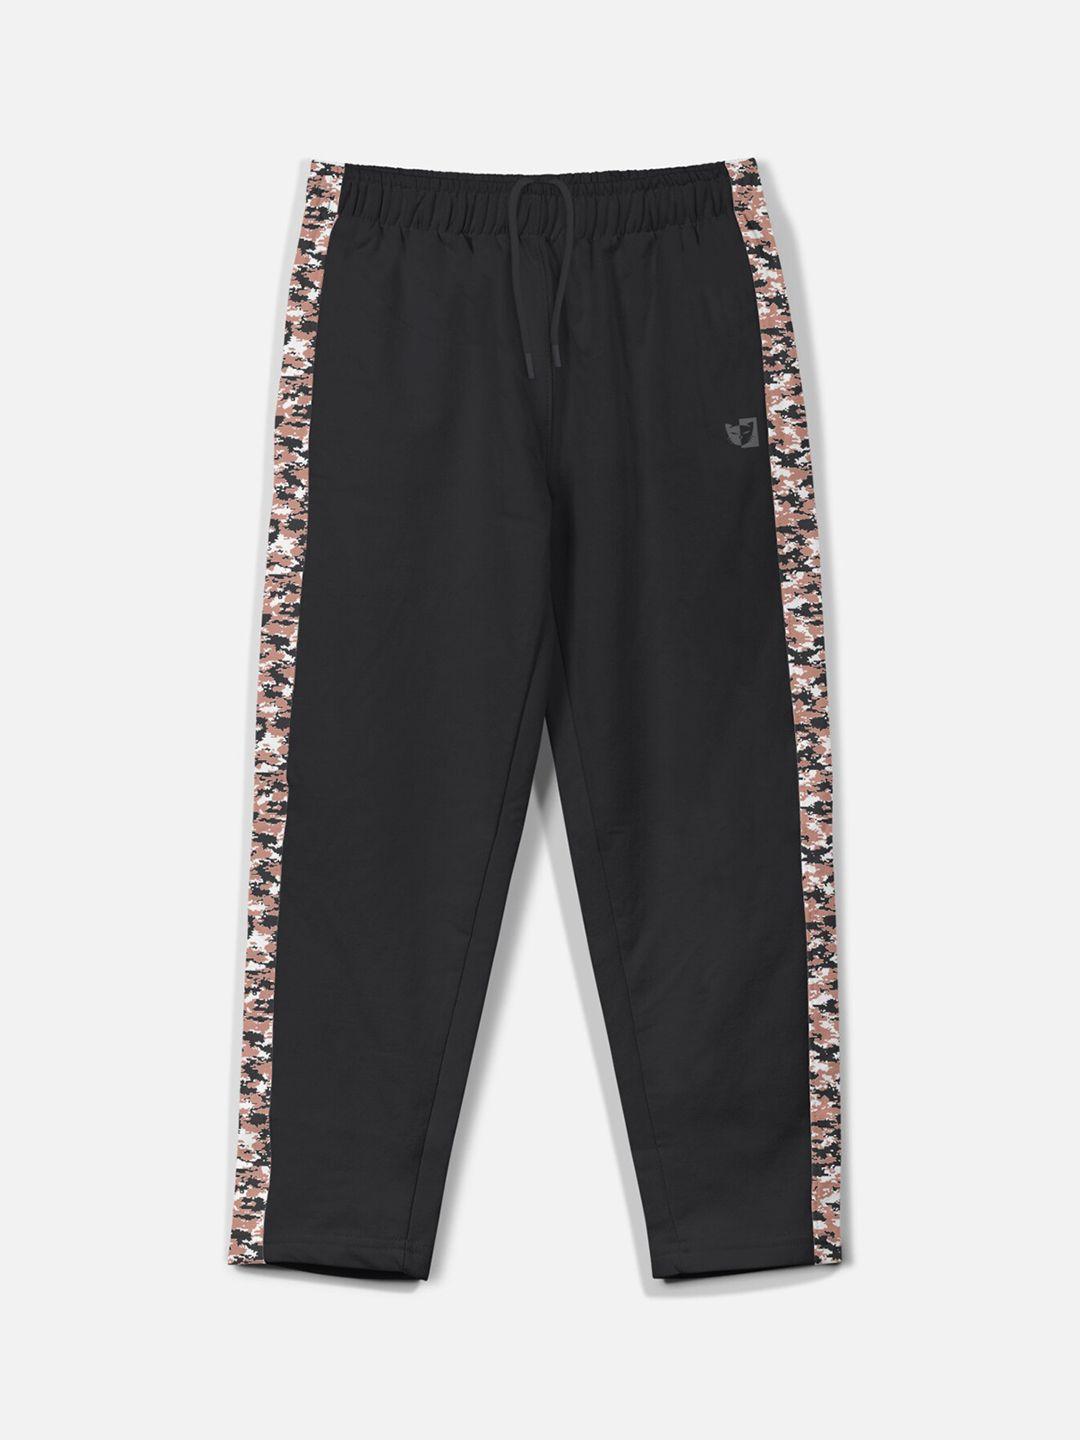 HELLCAT Boys Mid-Rise Camouflage Printed Track Pants